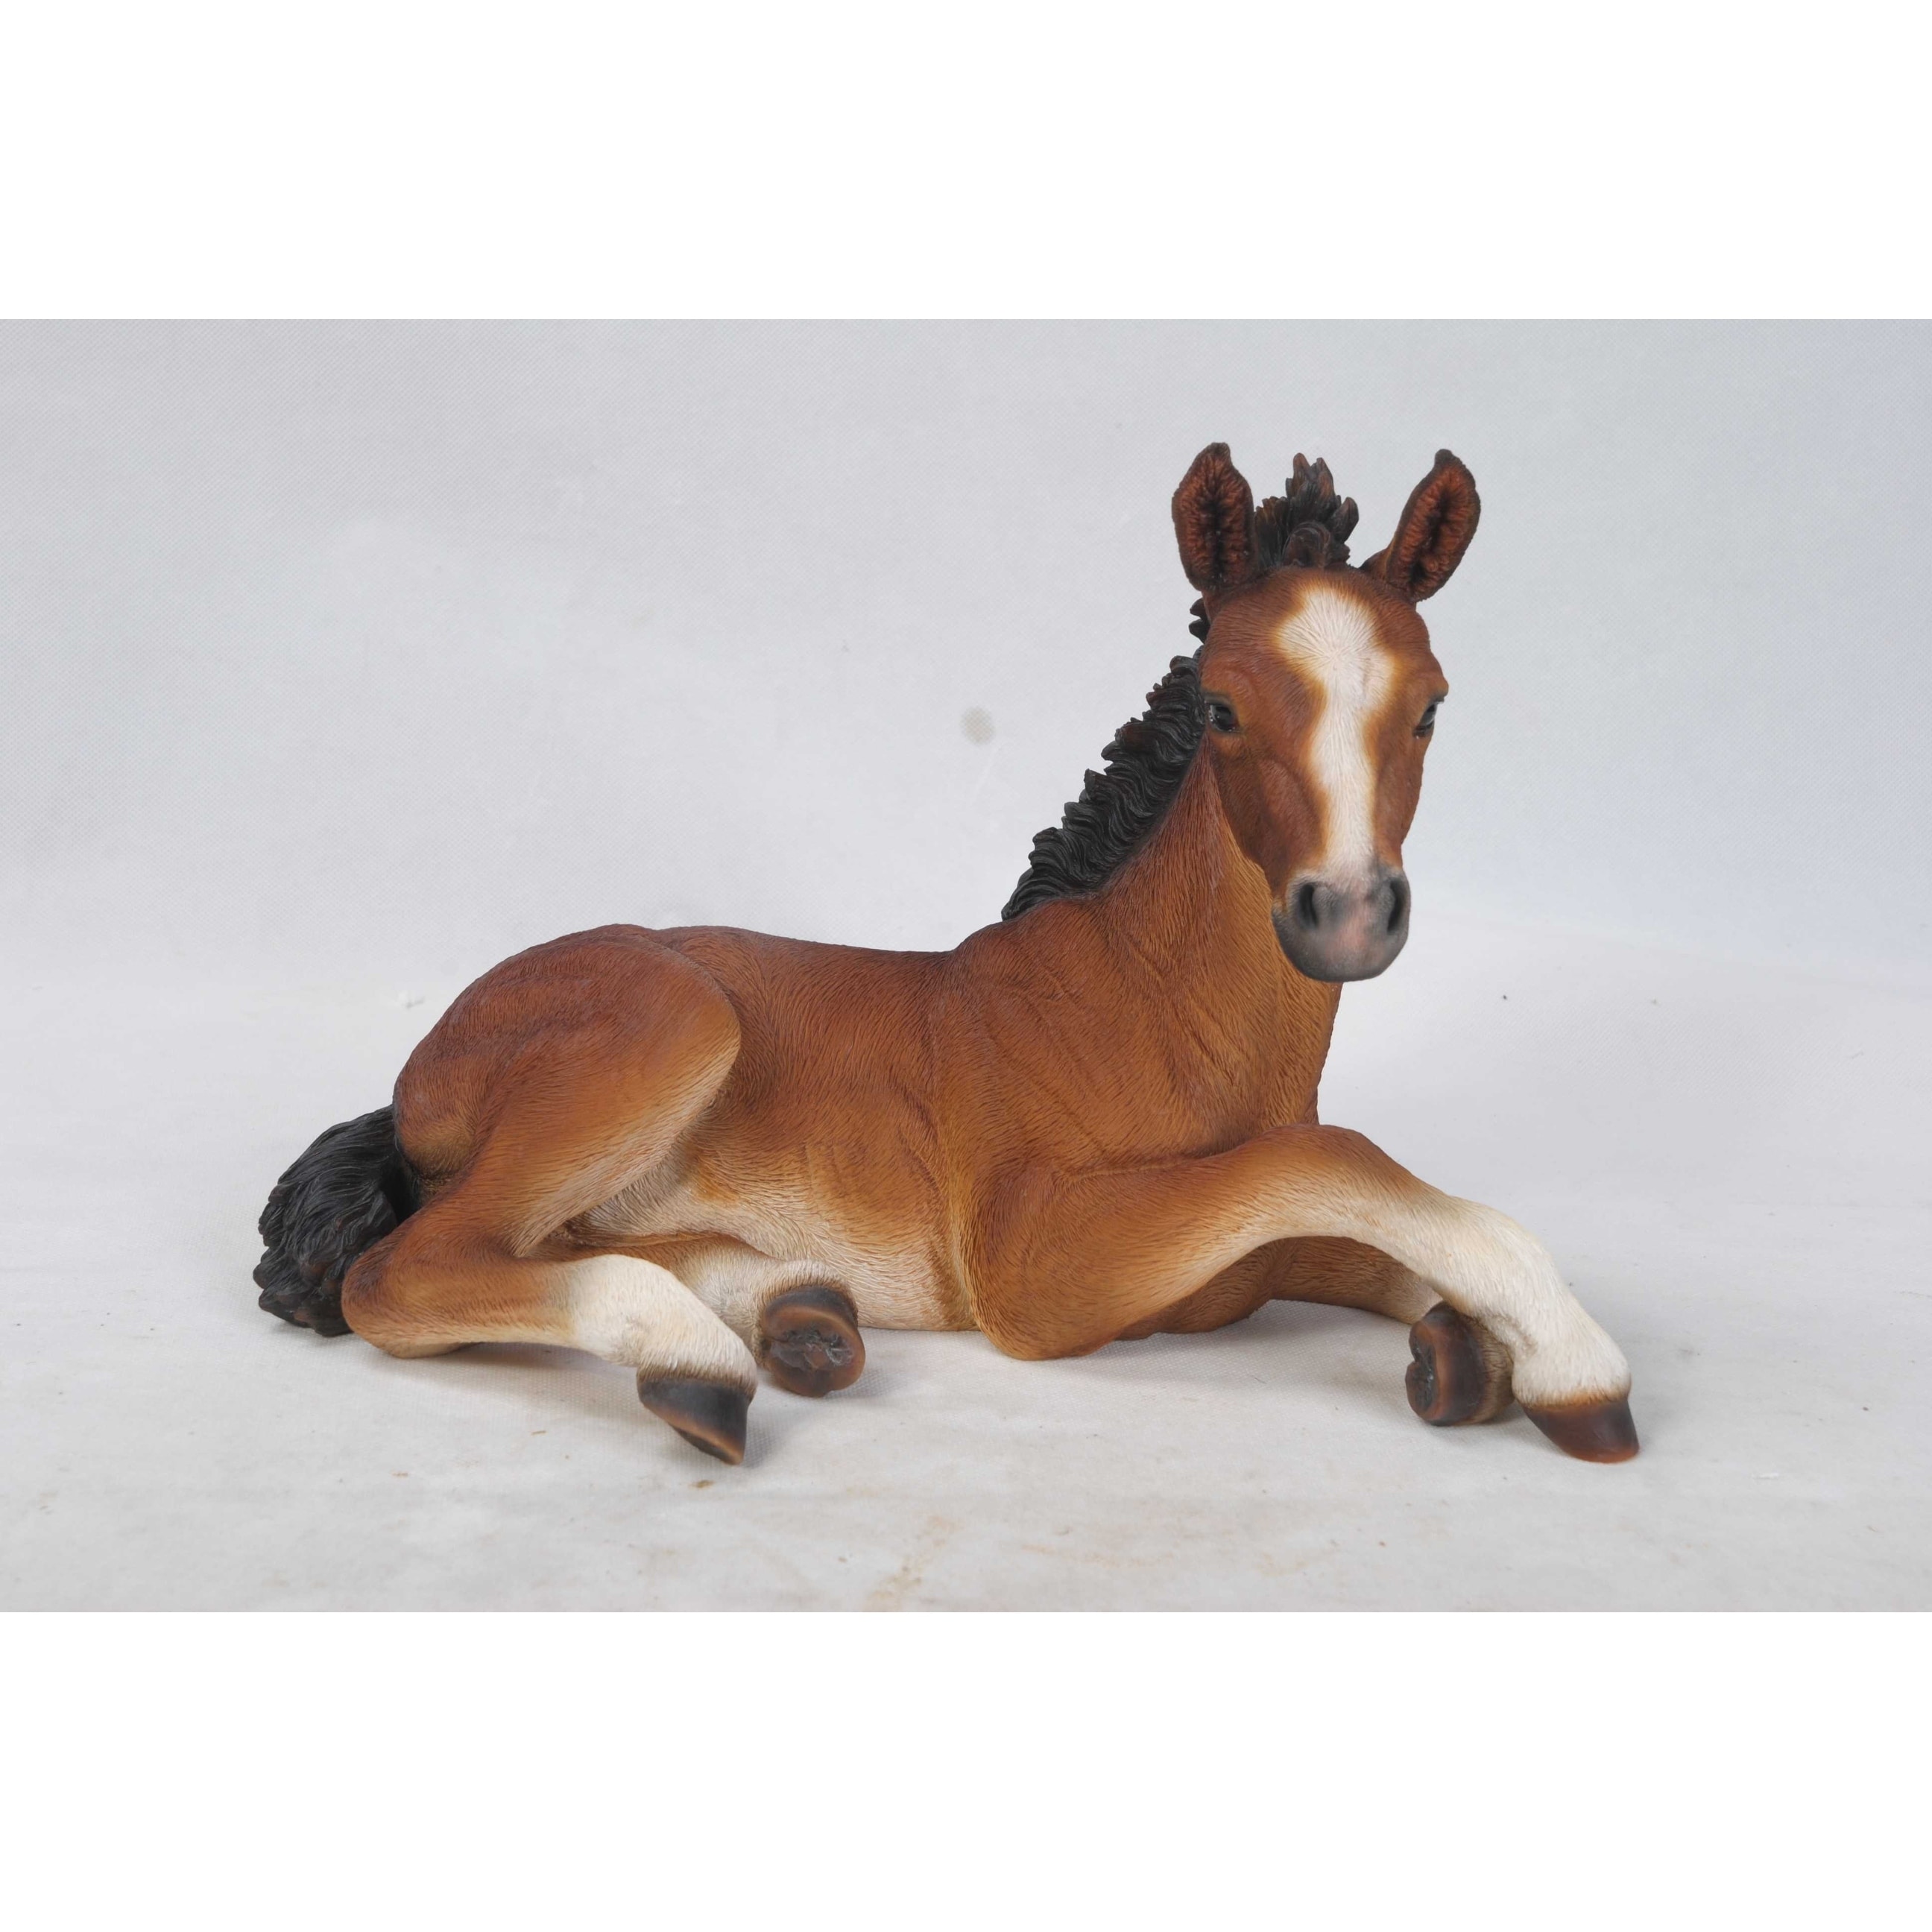 NEW Horse Colt Laying Down Statue Figurine Life Like Statue Home Garden 